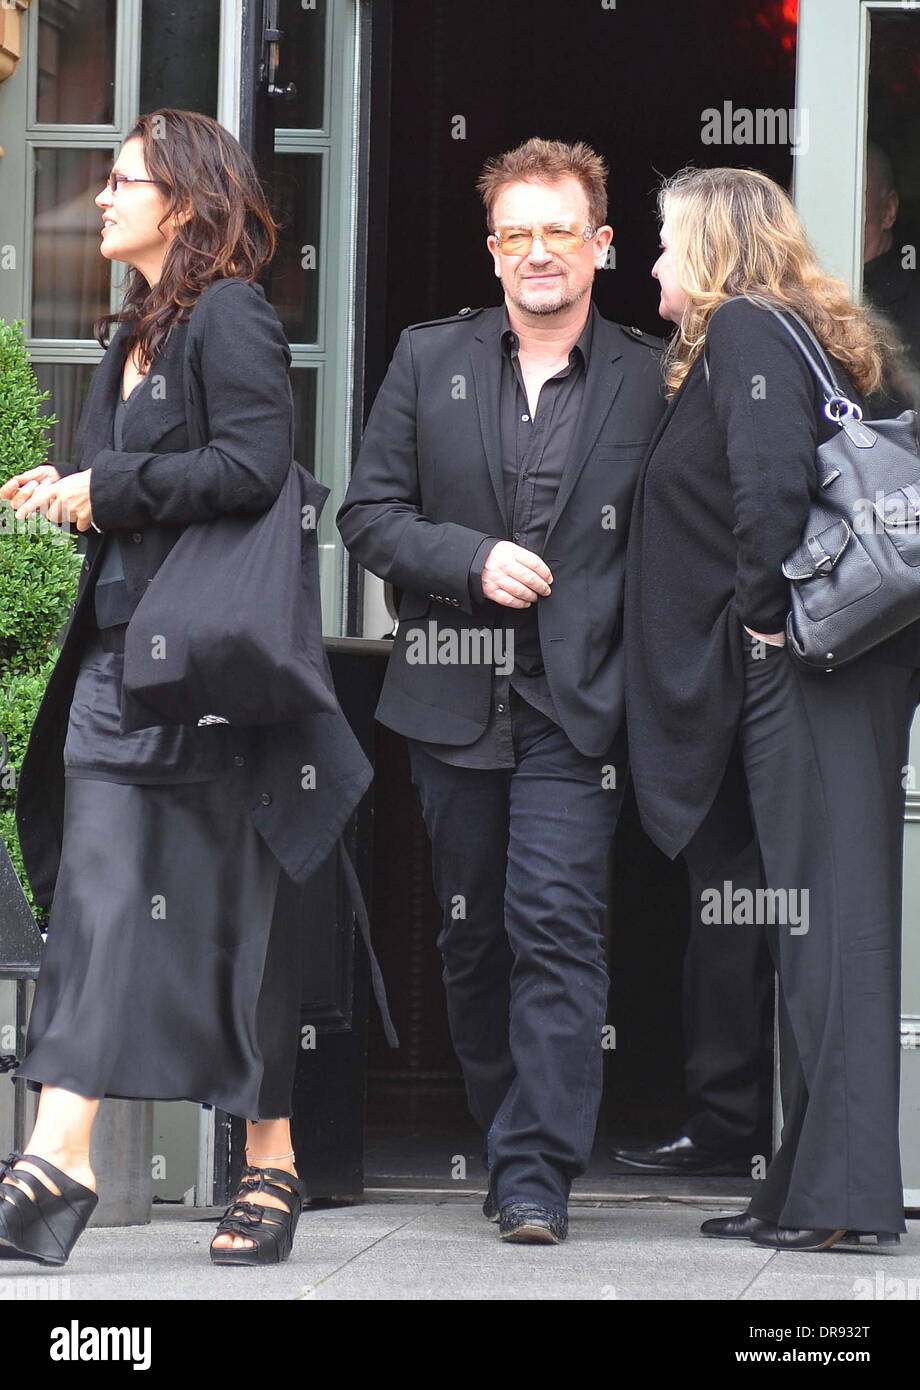 Ali Hewson and Bono U2 guitarist, The Edge meets Bono at the Dylan hotel amid reports that his mother Gwenda Evans has died Dublin, Ireland - 13.06.12 Stock Photo